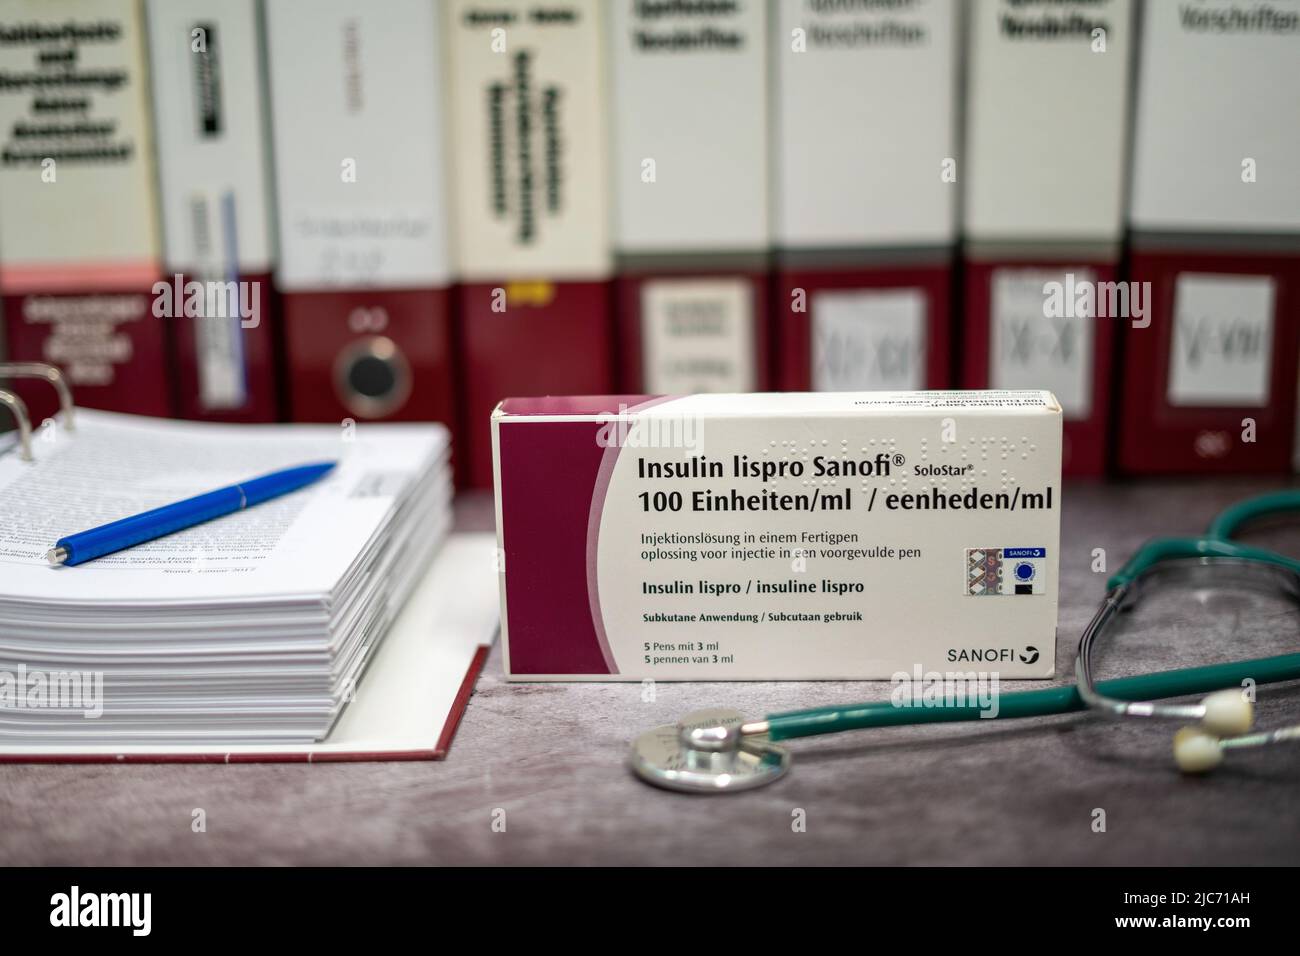 Insulin lispro injection containing Insulin lispro for treatment of  type 1 diabetes. Stock Photo